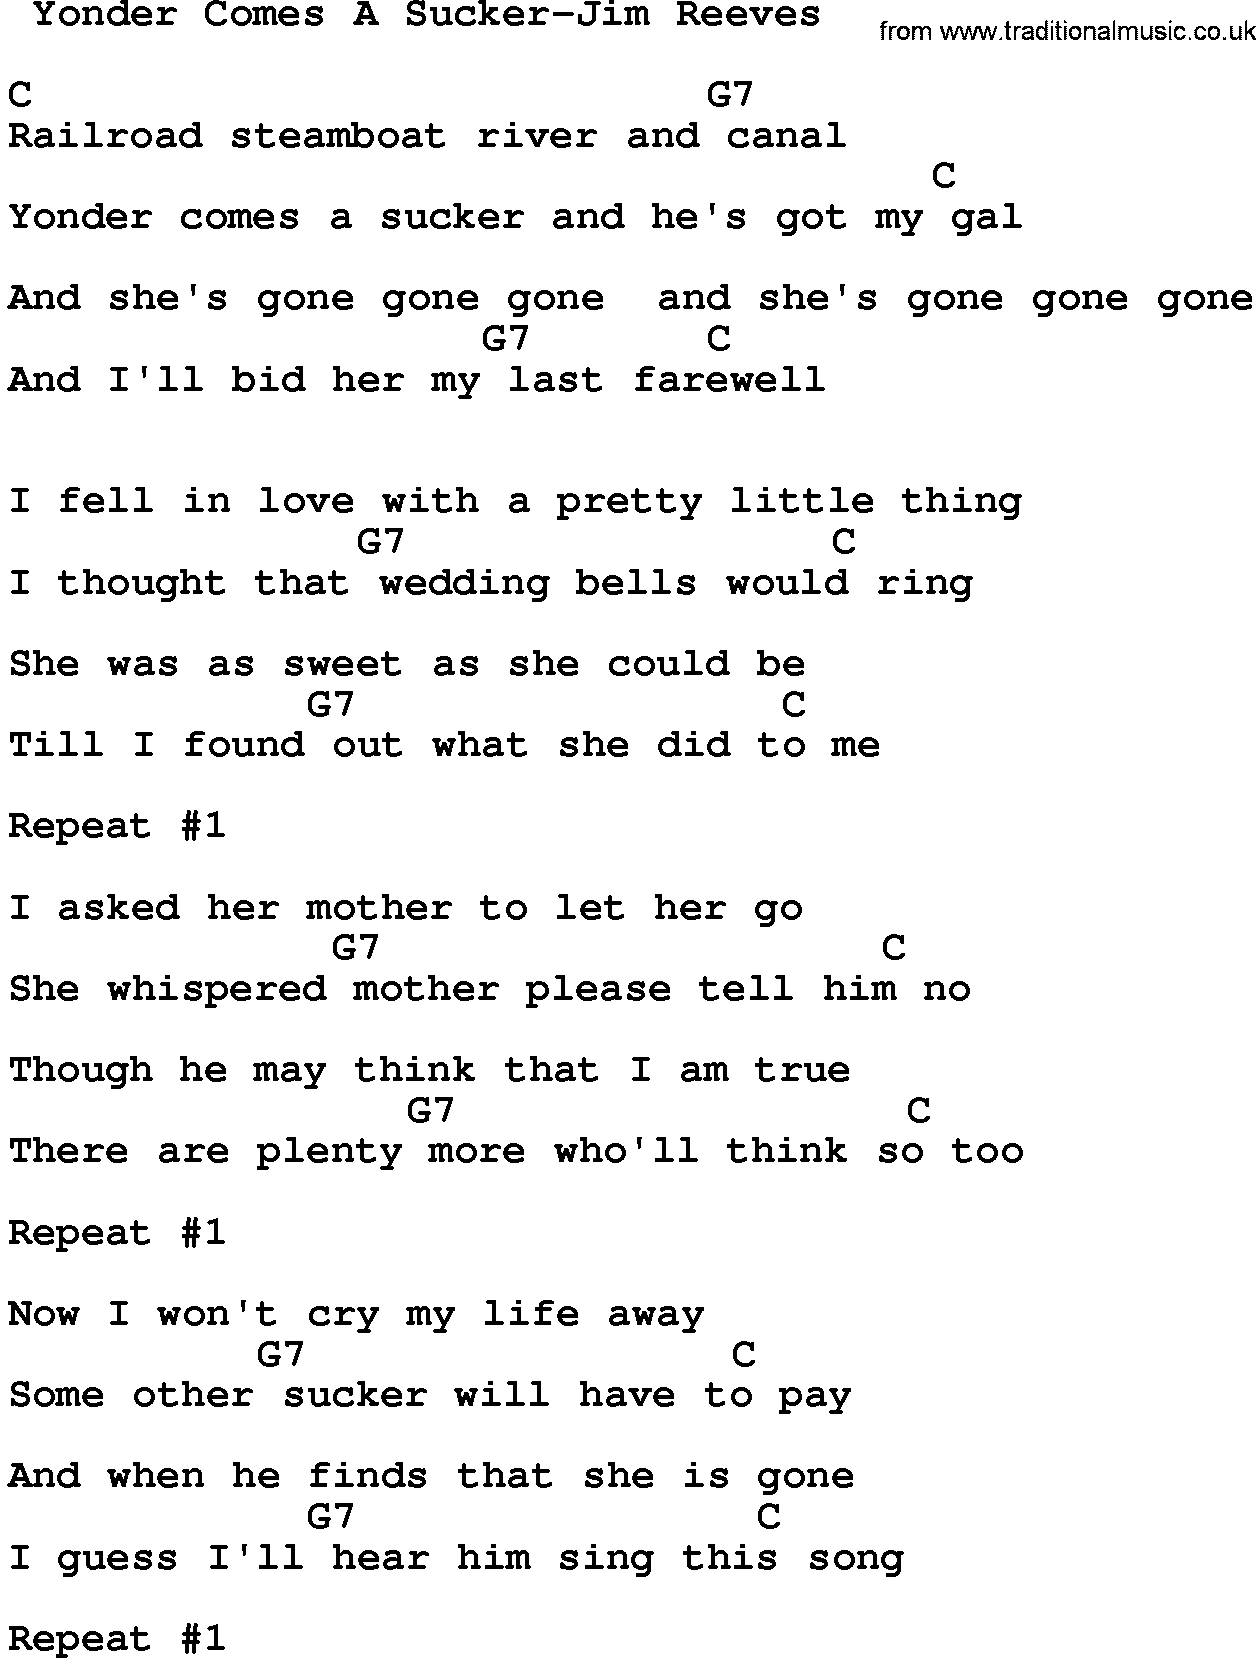 Country music song: Yonder Comes A Sucker-Jim Reeves lyrics and chords